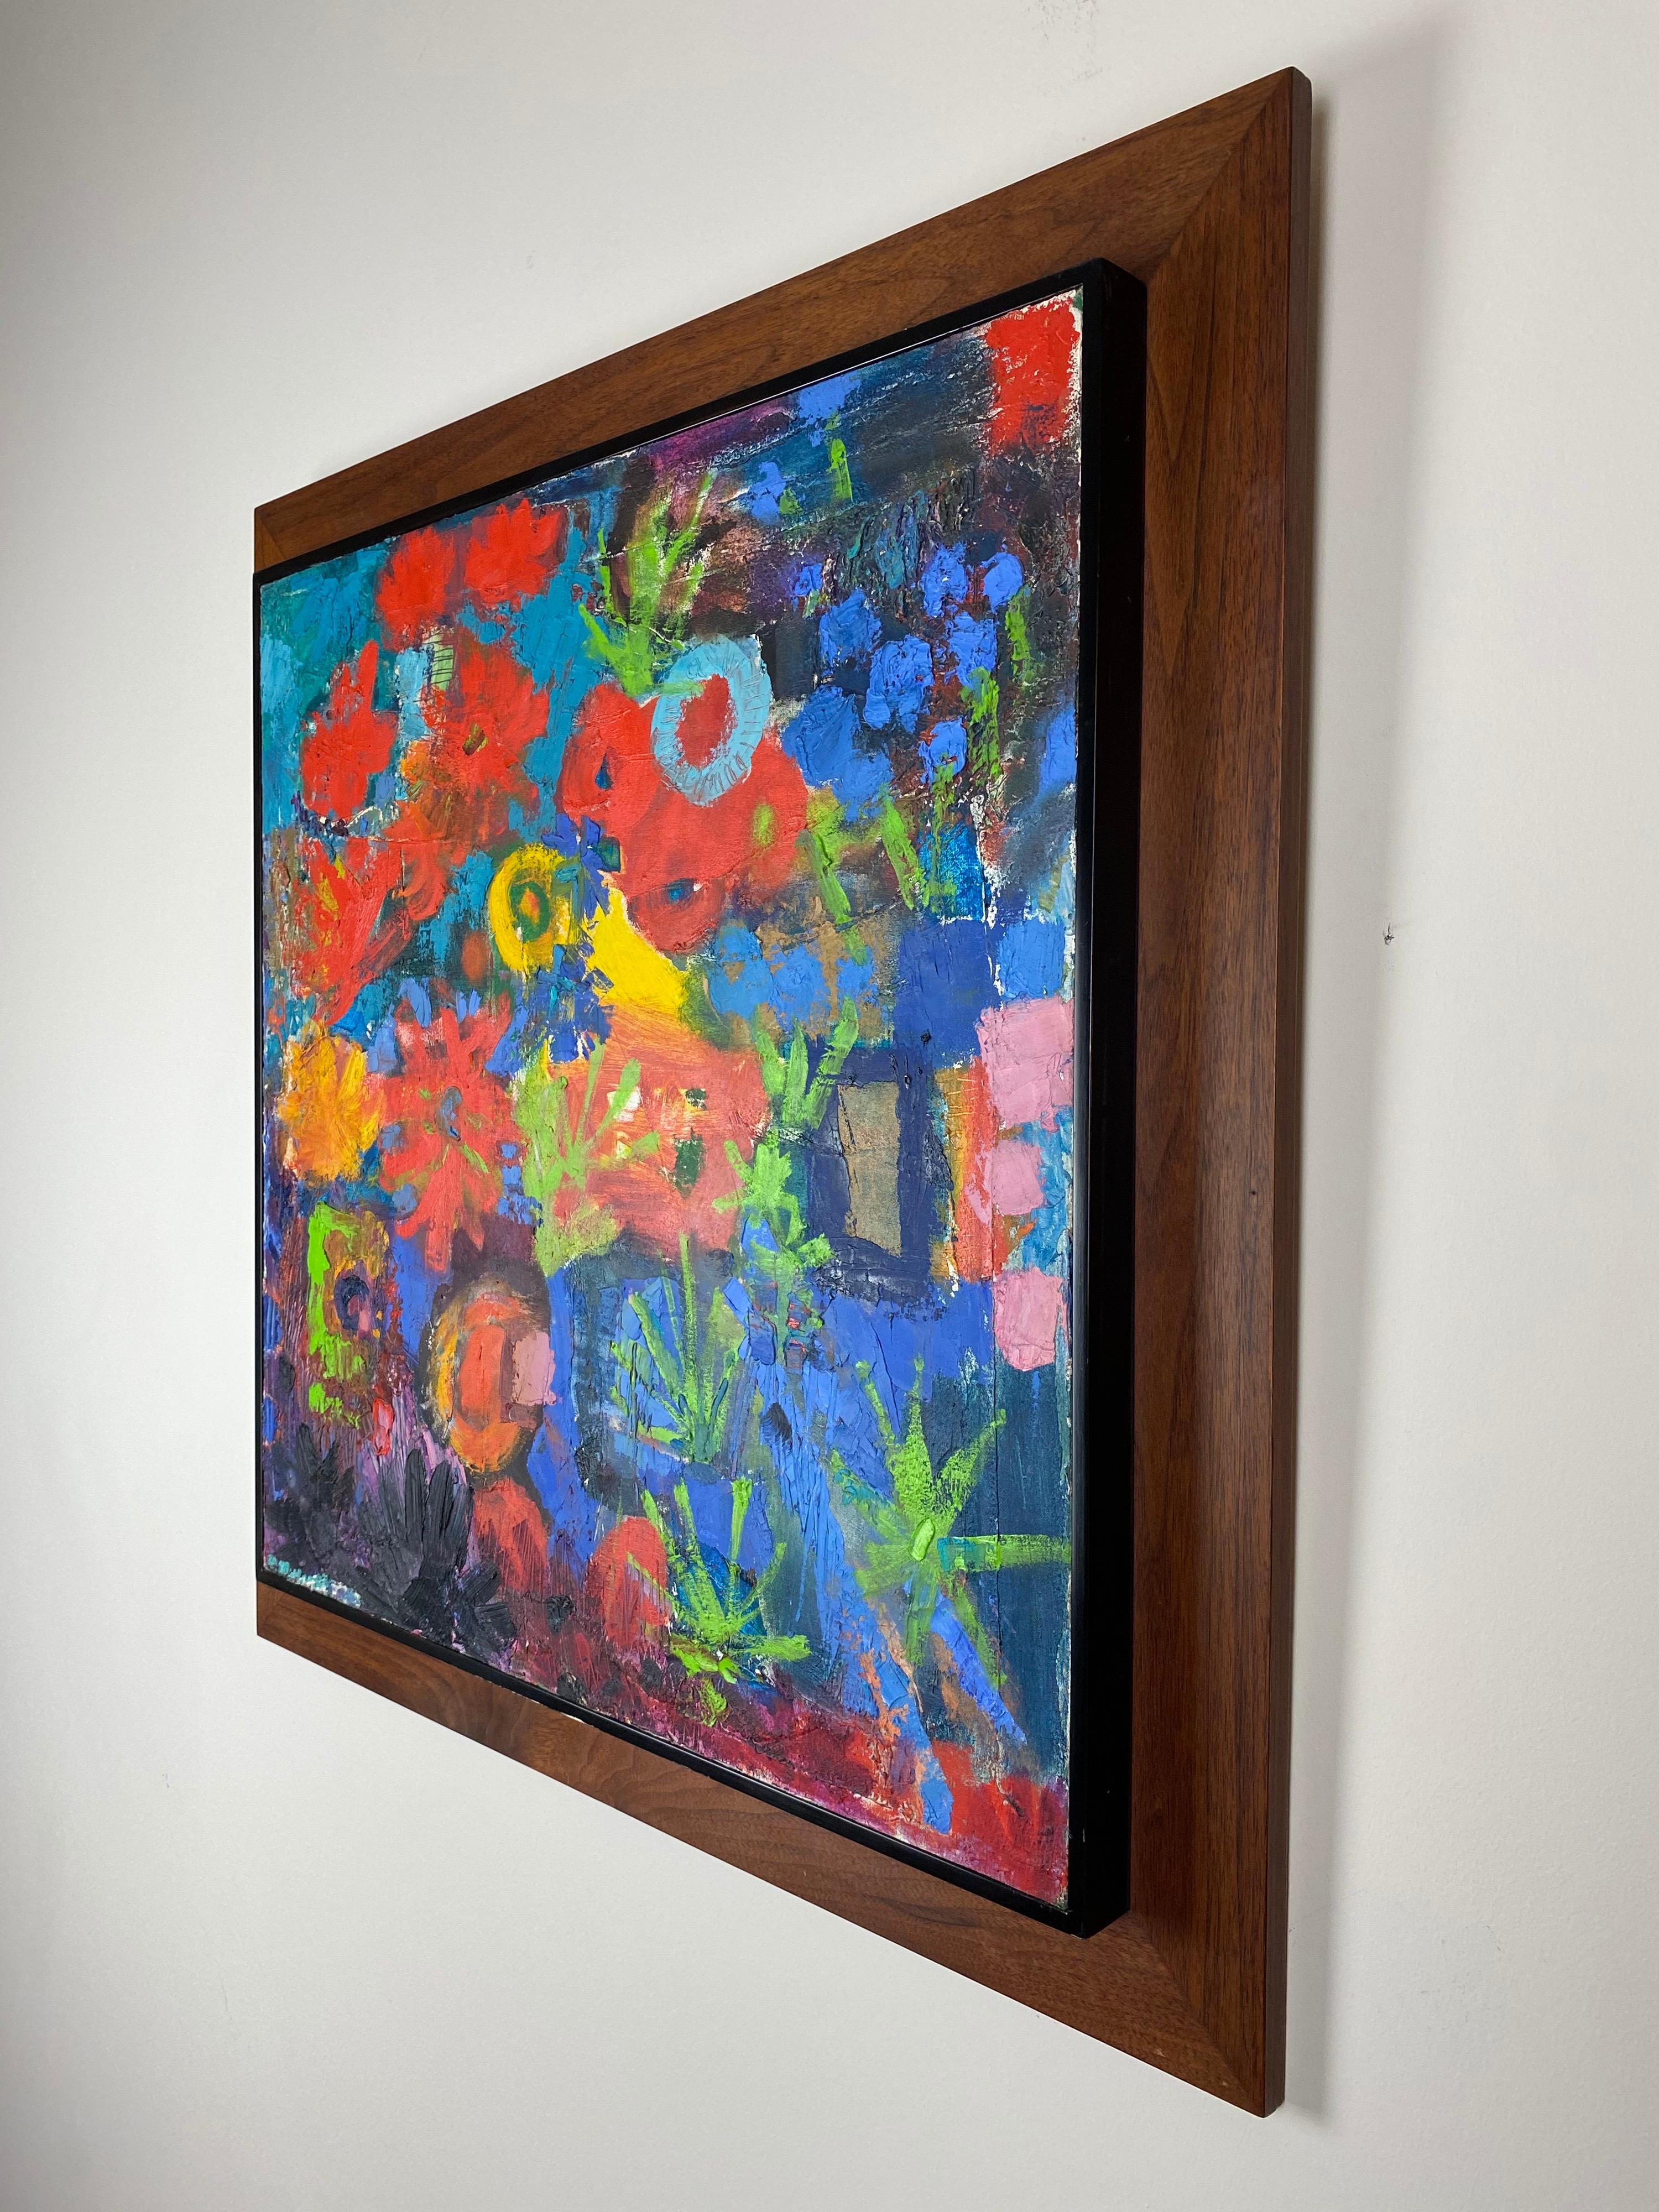 Vivid color and wonderful compositions to this abstract painting. Contrasting colors and abstract arrangement with a fine walnut frame.